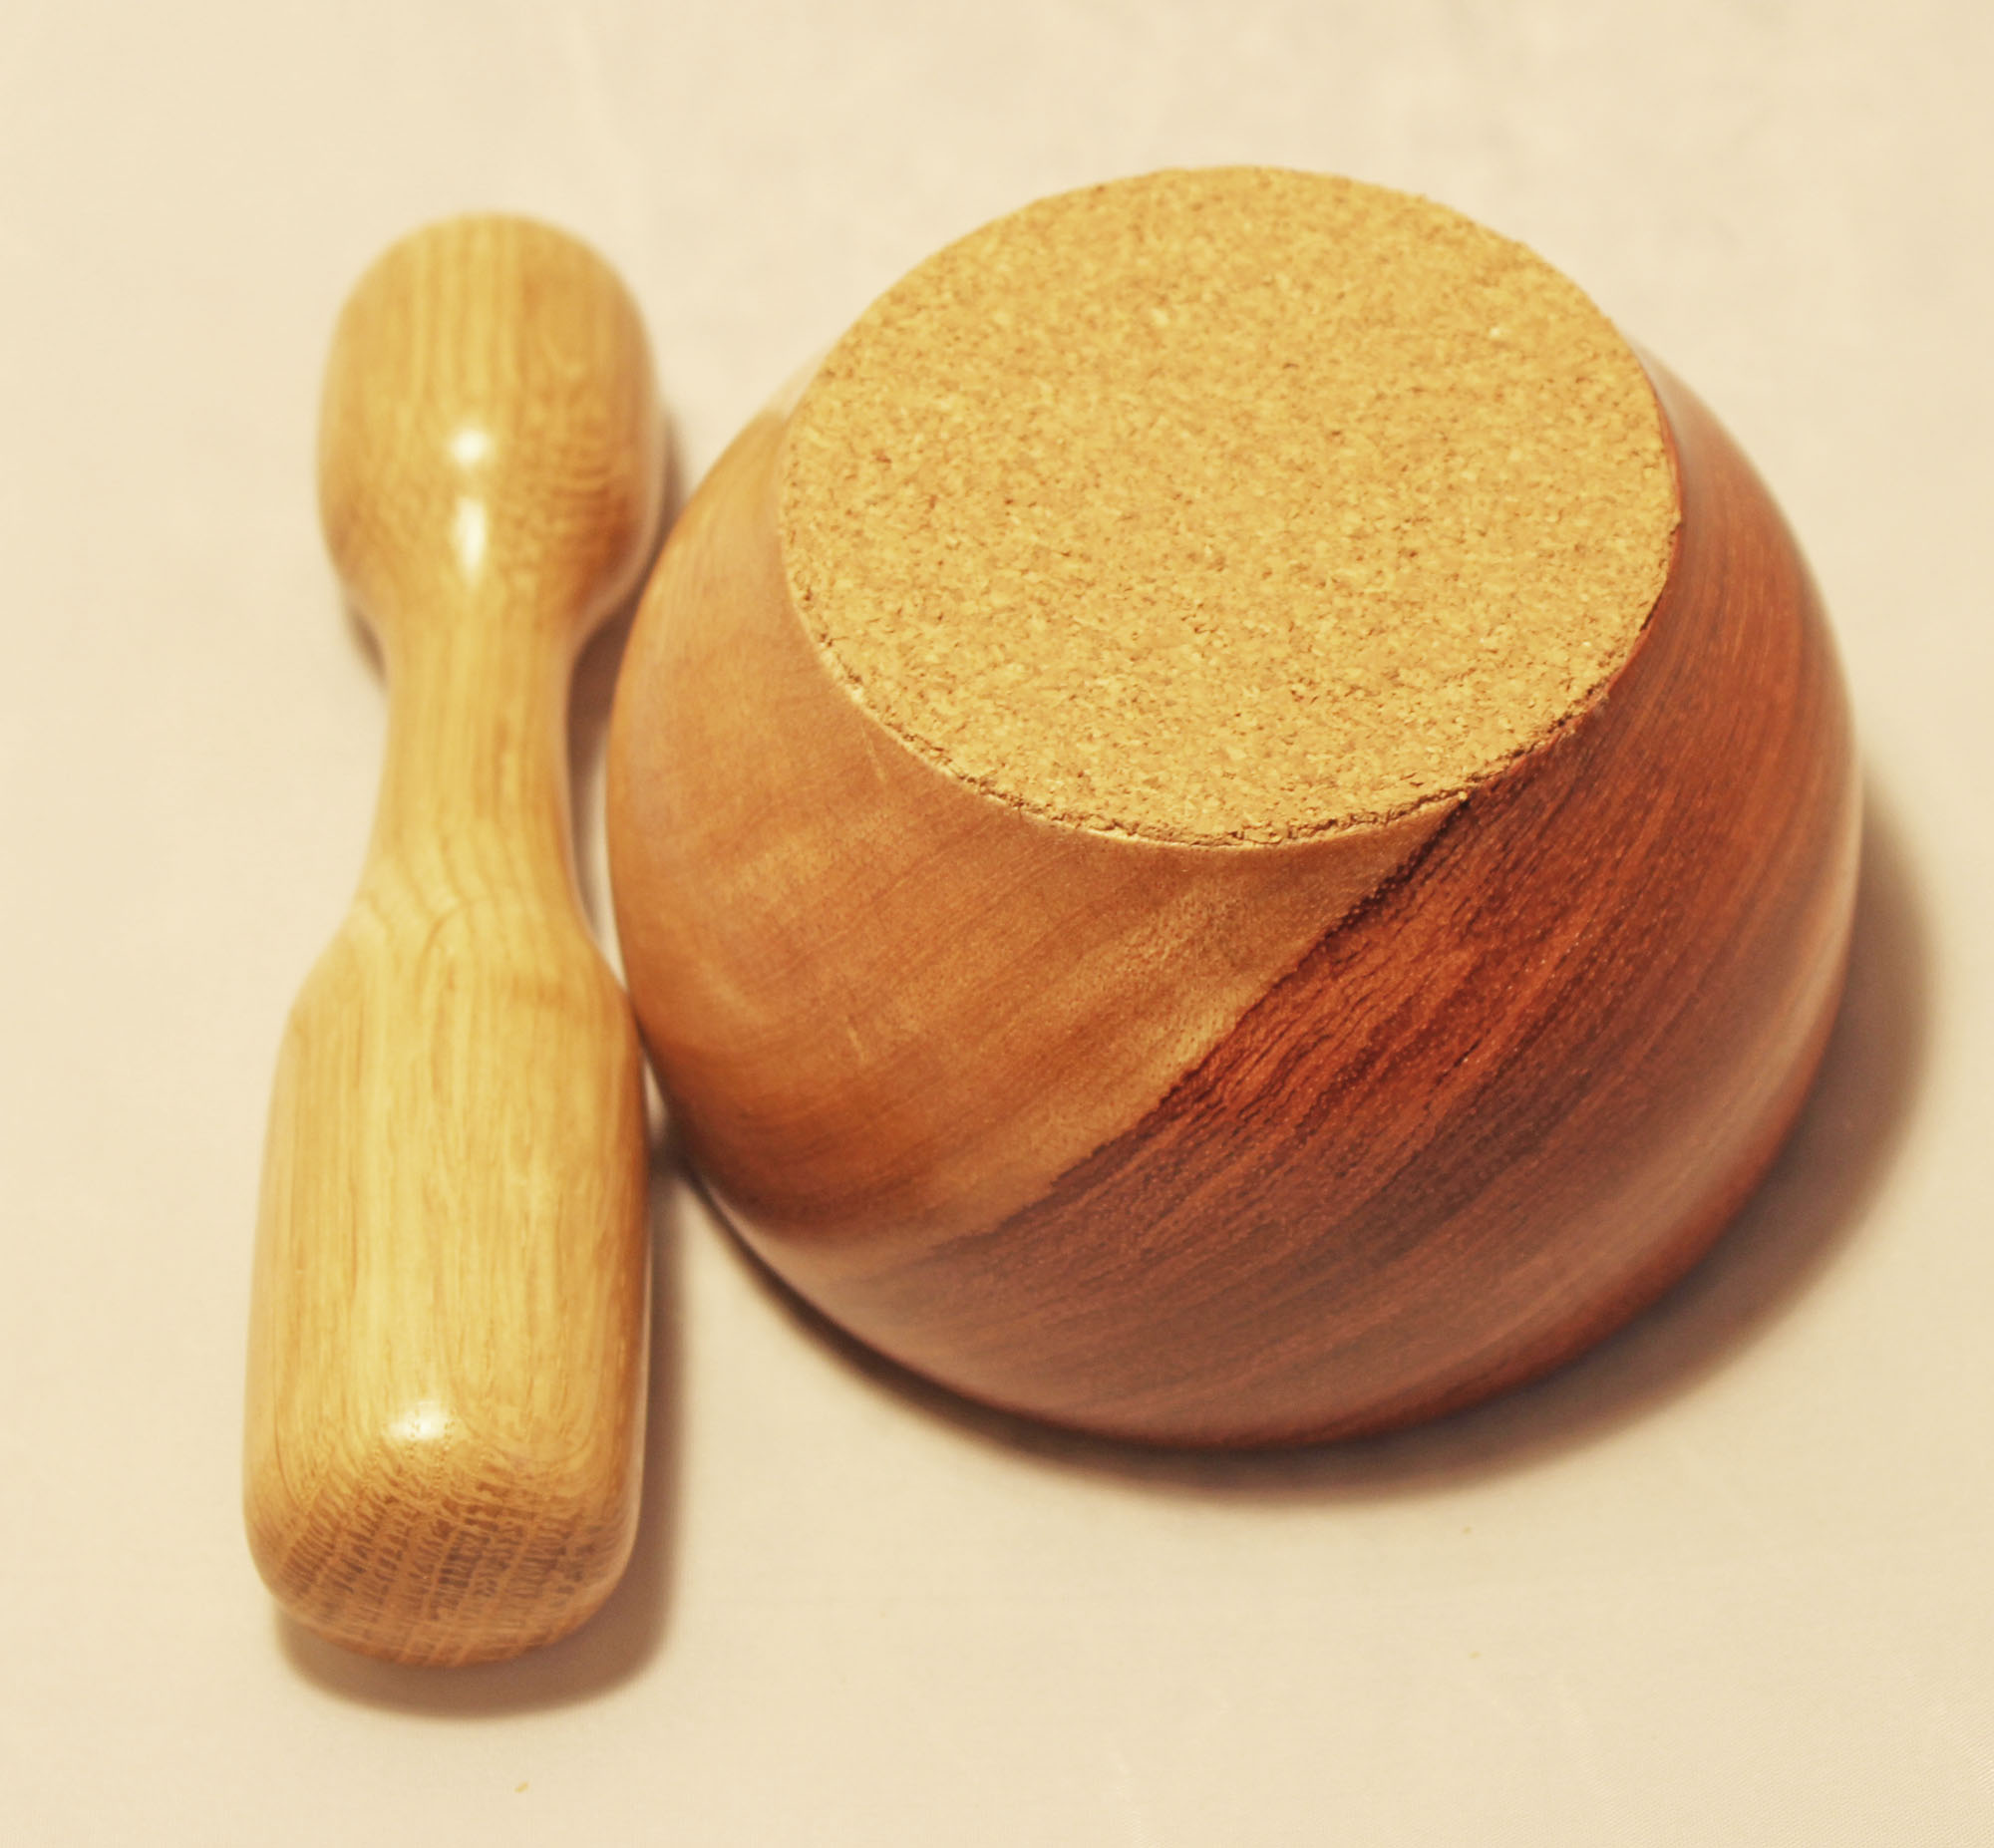 wood turning projects for beginners mortar and pestle 1